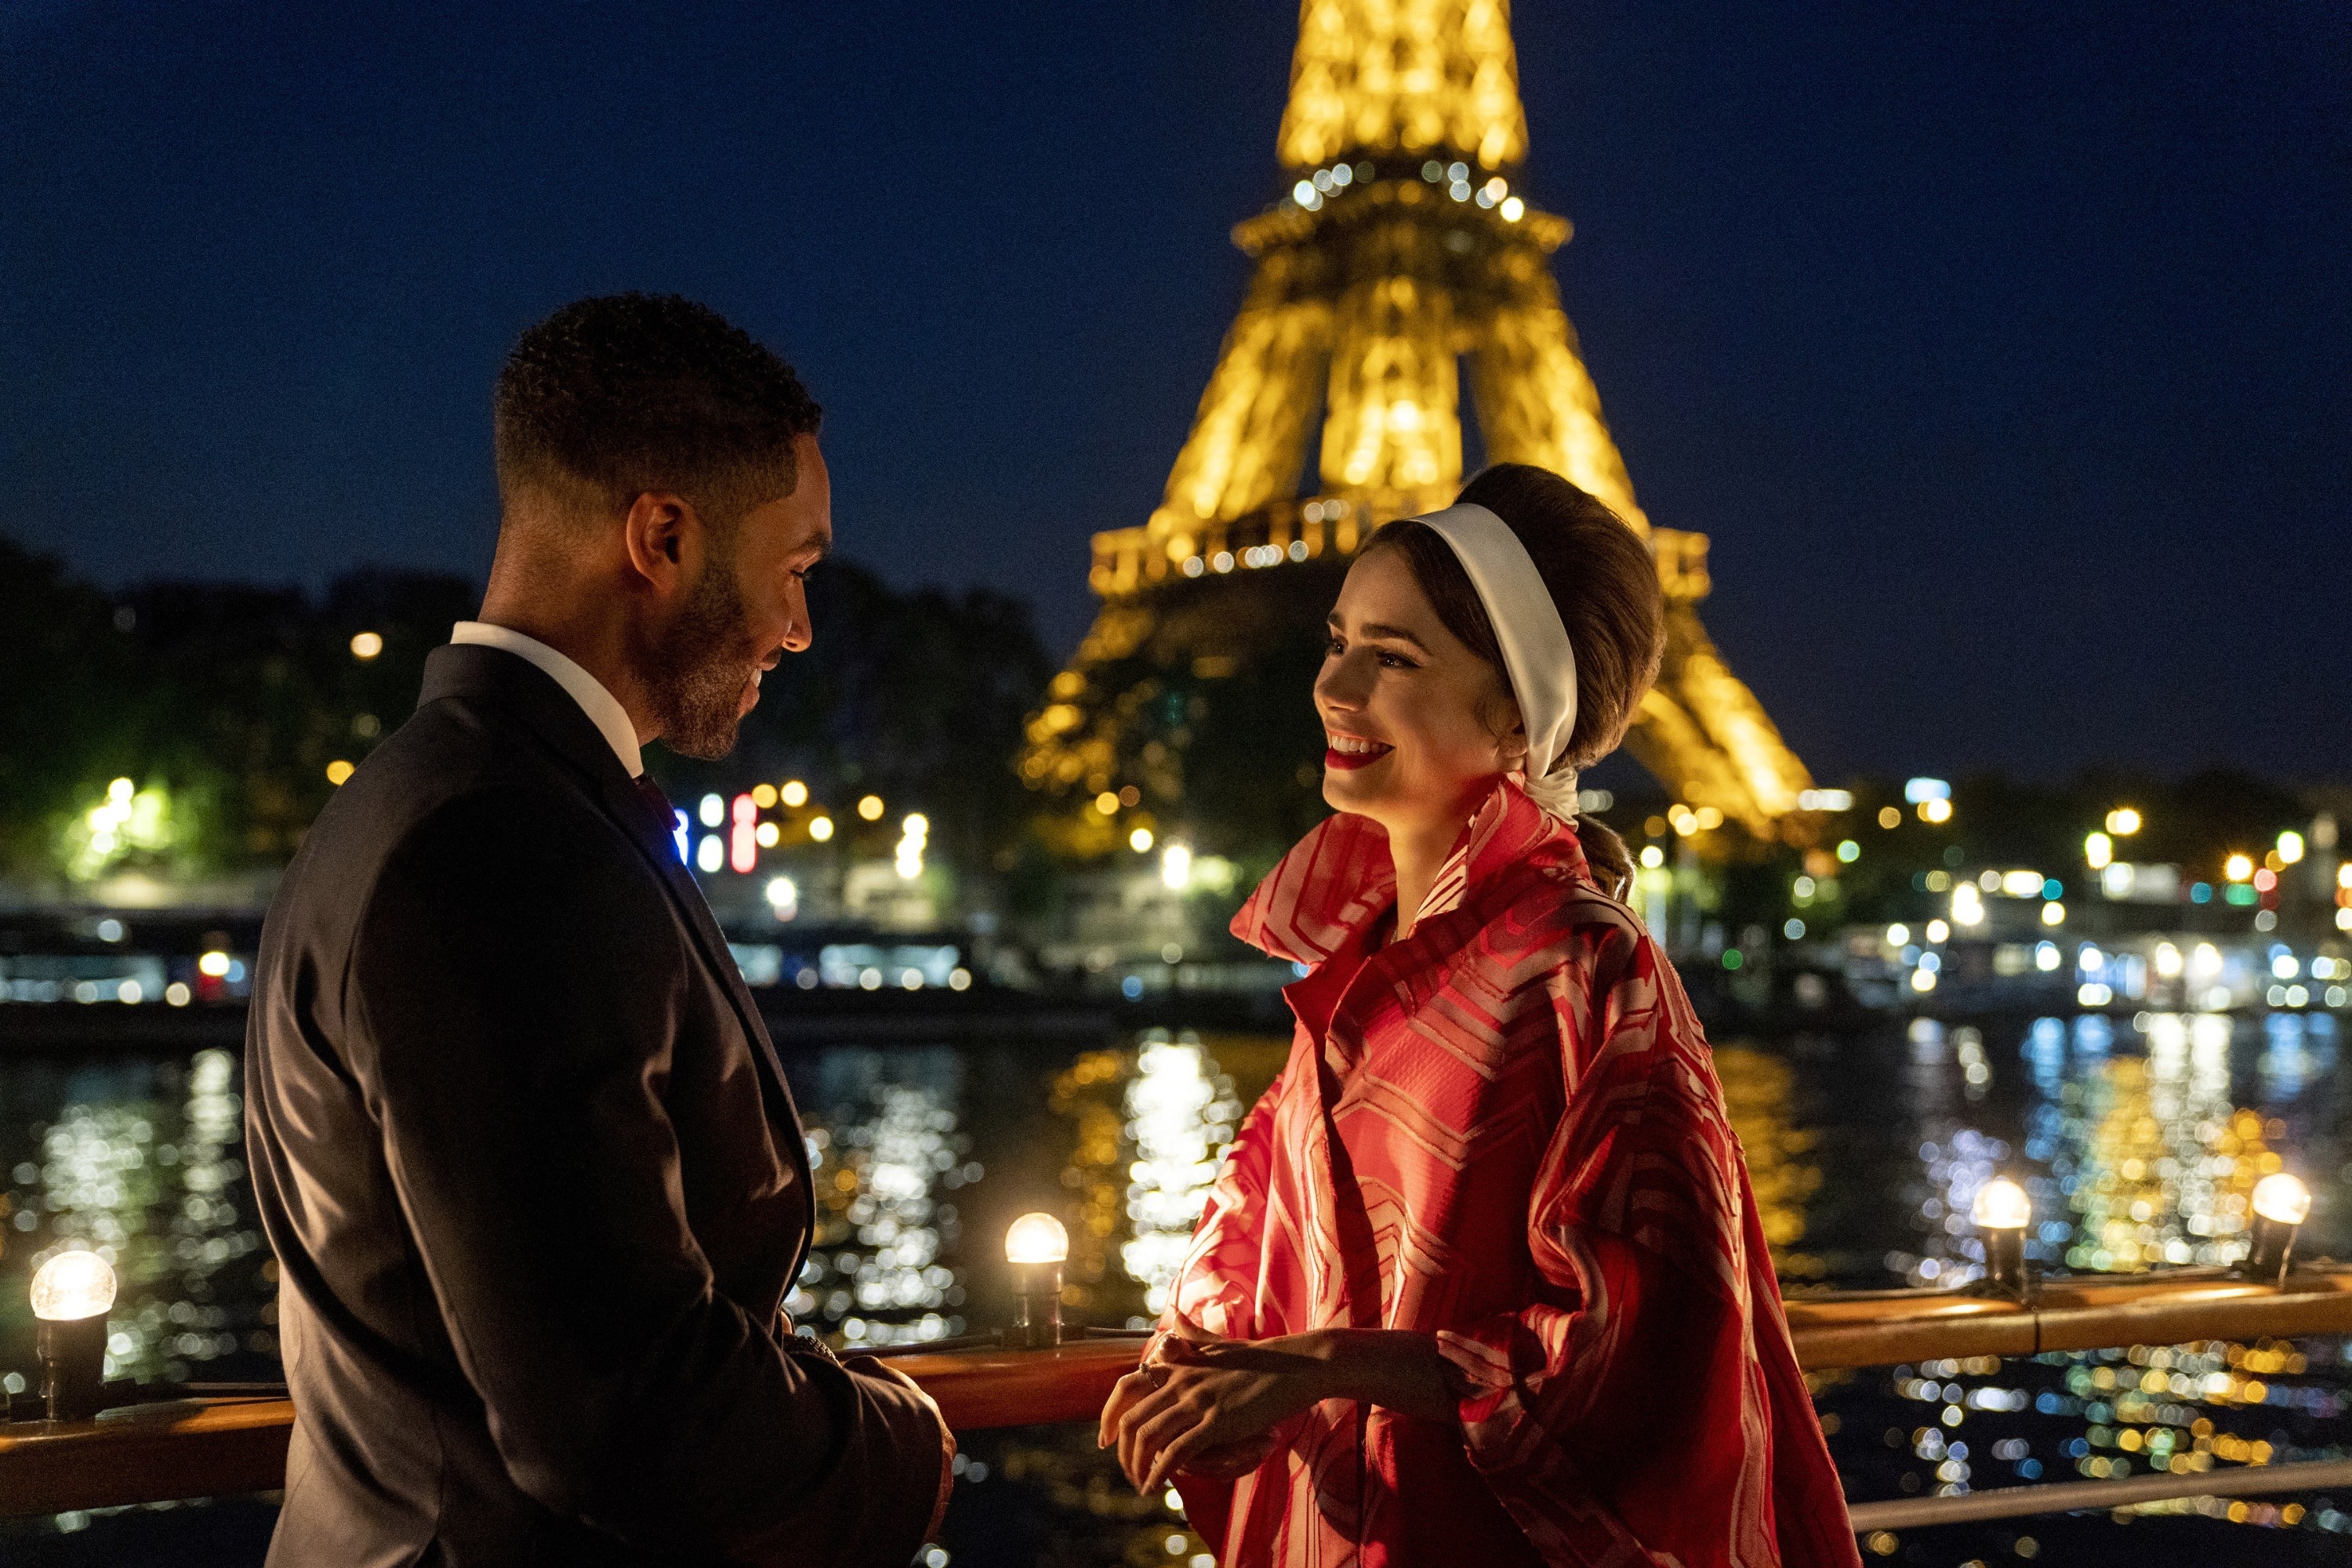 Still from &quot;Emily in Paris&quot; featuring Lucien Laviscount (L) and Lily (R) with the Eiffel Tower and the Seine River in the background at nighttime